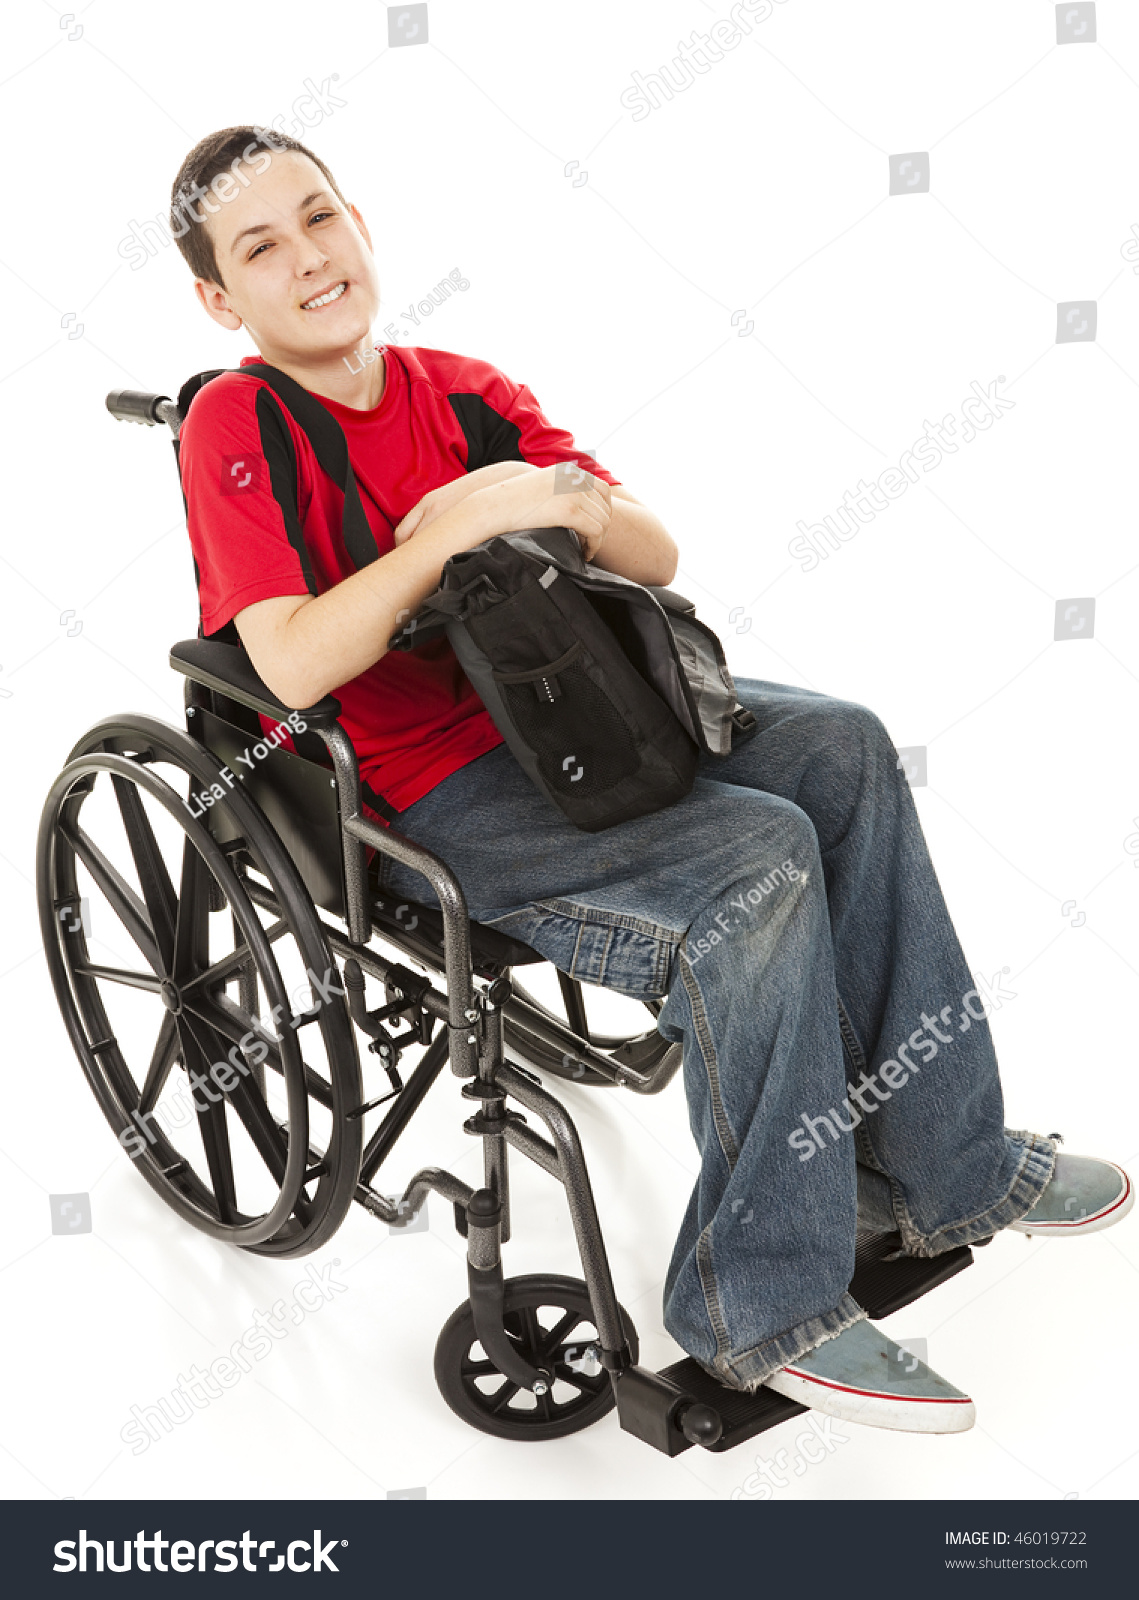 Disabled Teen Boy In His Wheelchair With His Backpack. Full Body ...